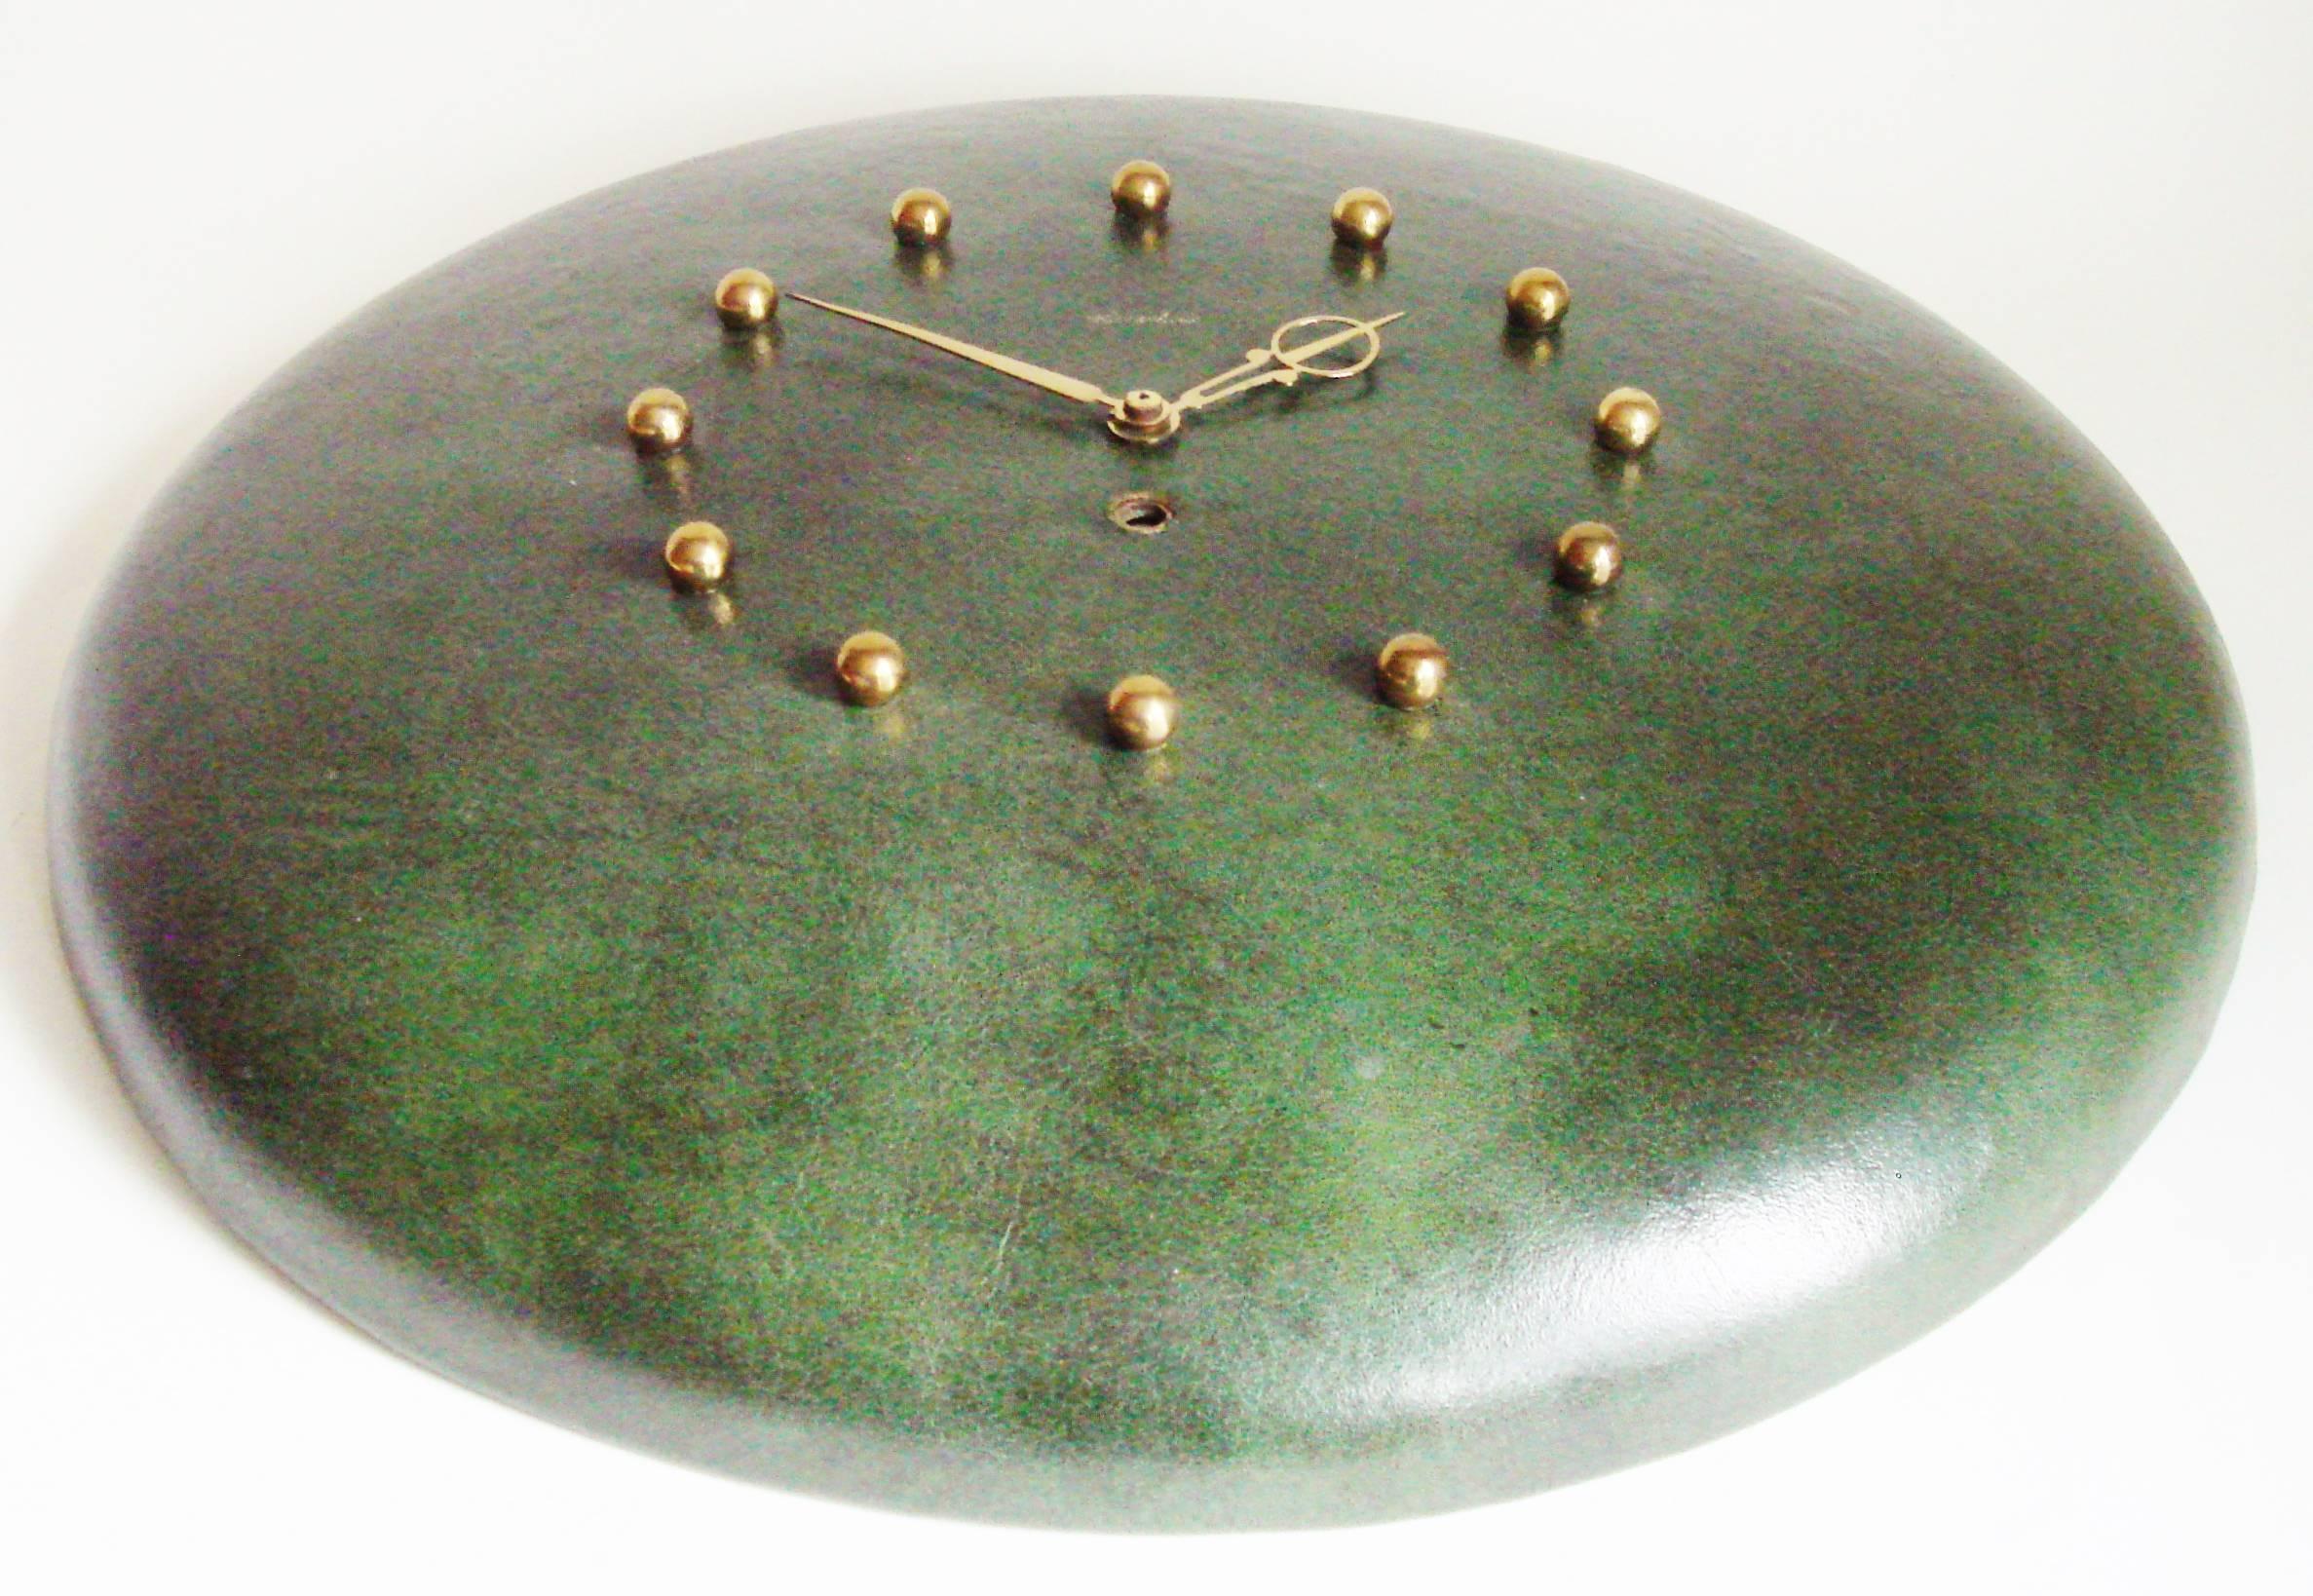 This American Mid-Century Modern large mechanical eight-day wall clock is made from base metal wrapped in mottled dark green leather. The numerals are represented by small polished brass spheres and the ornate hands are in polished brass also. The